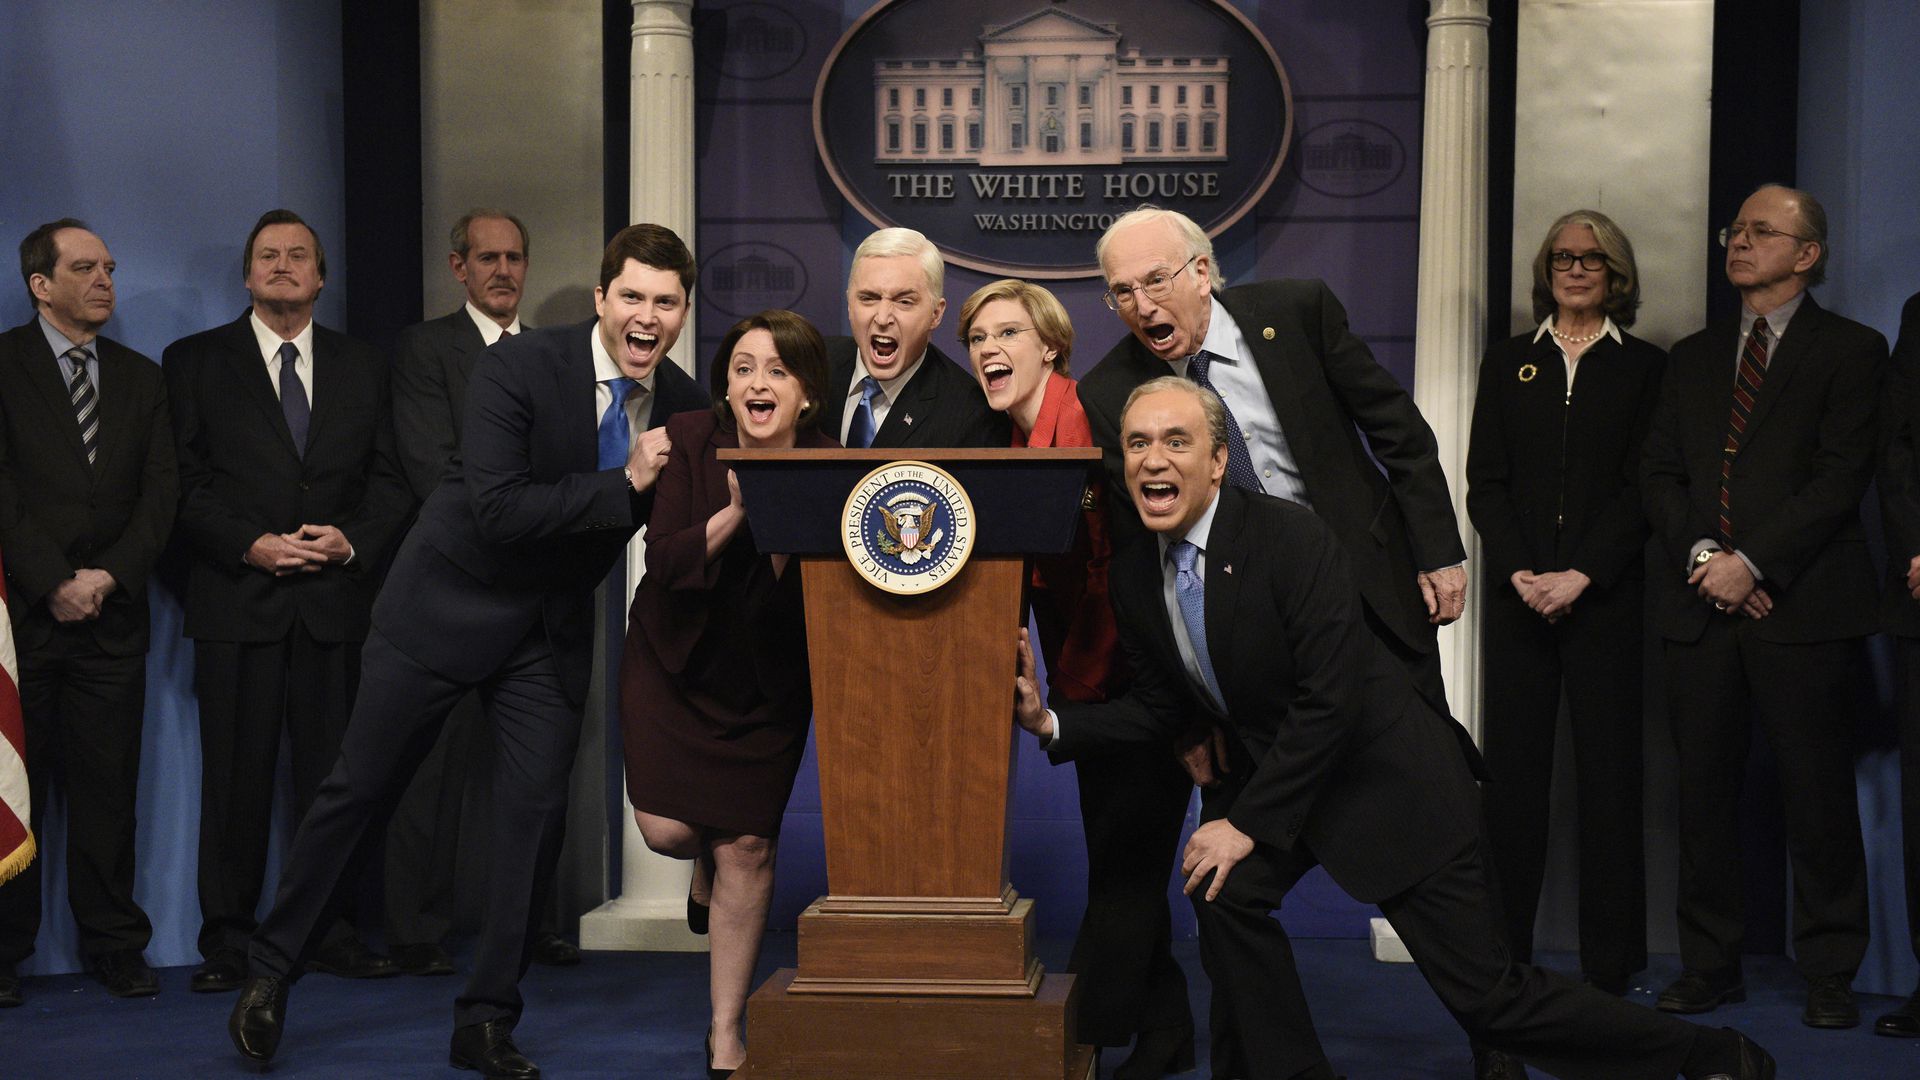 10 Of The Funniest SNL Skits Ranked • The Daily Fandom